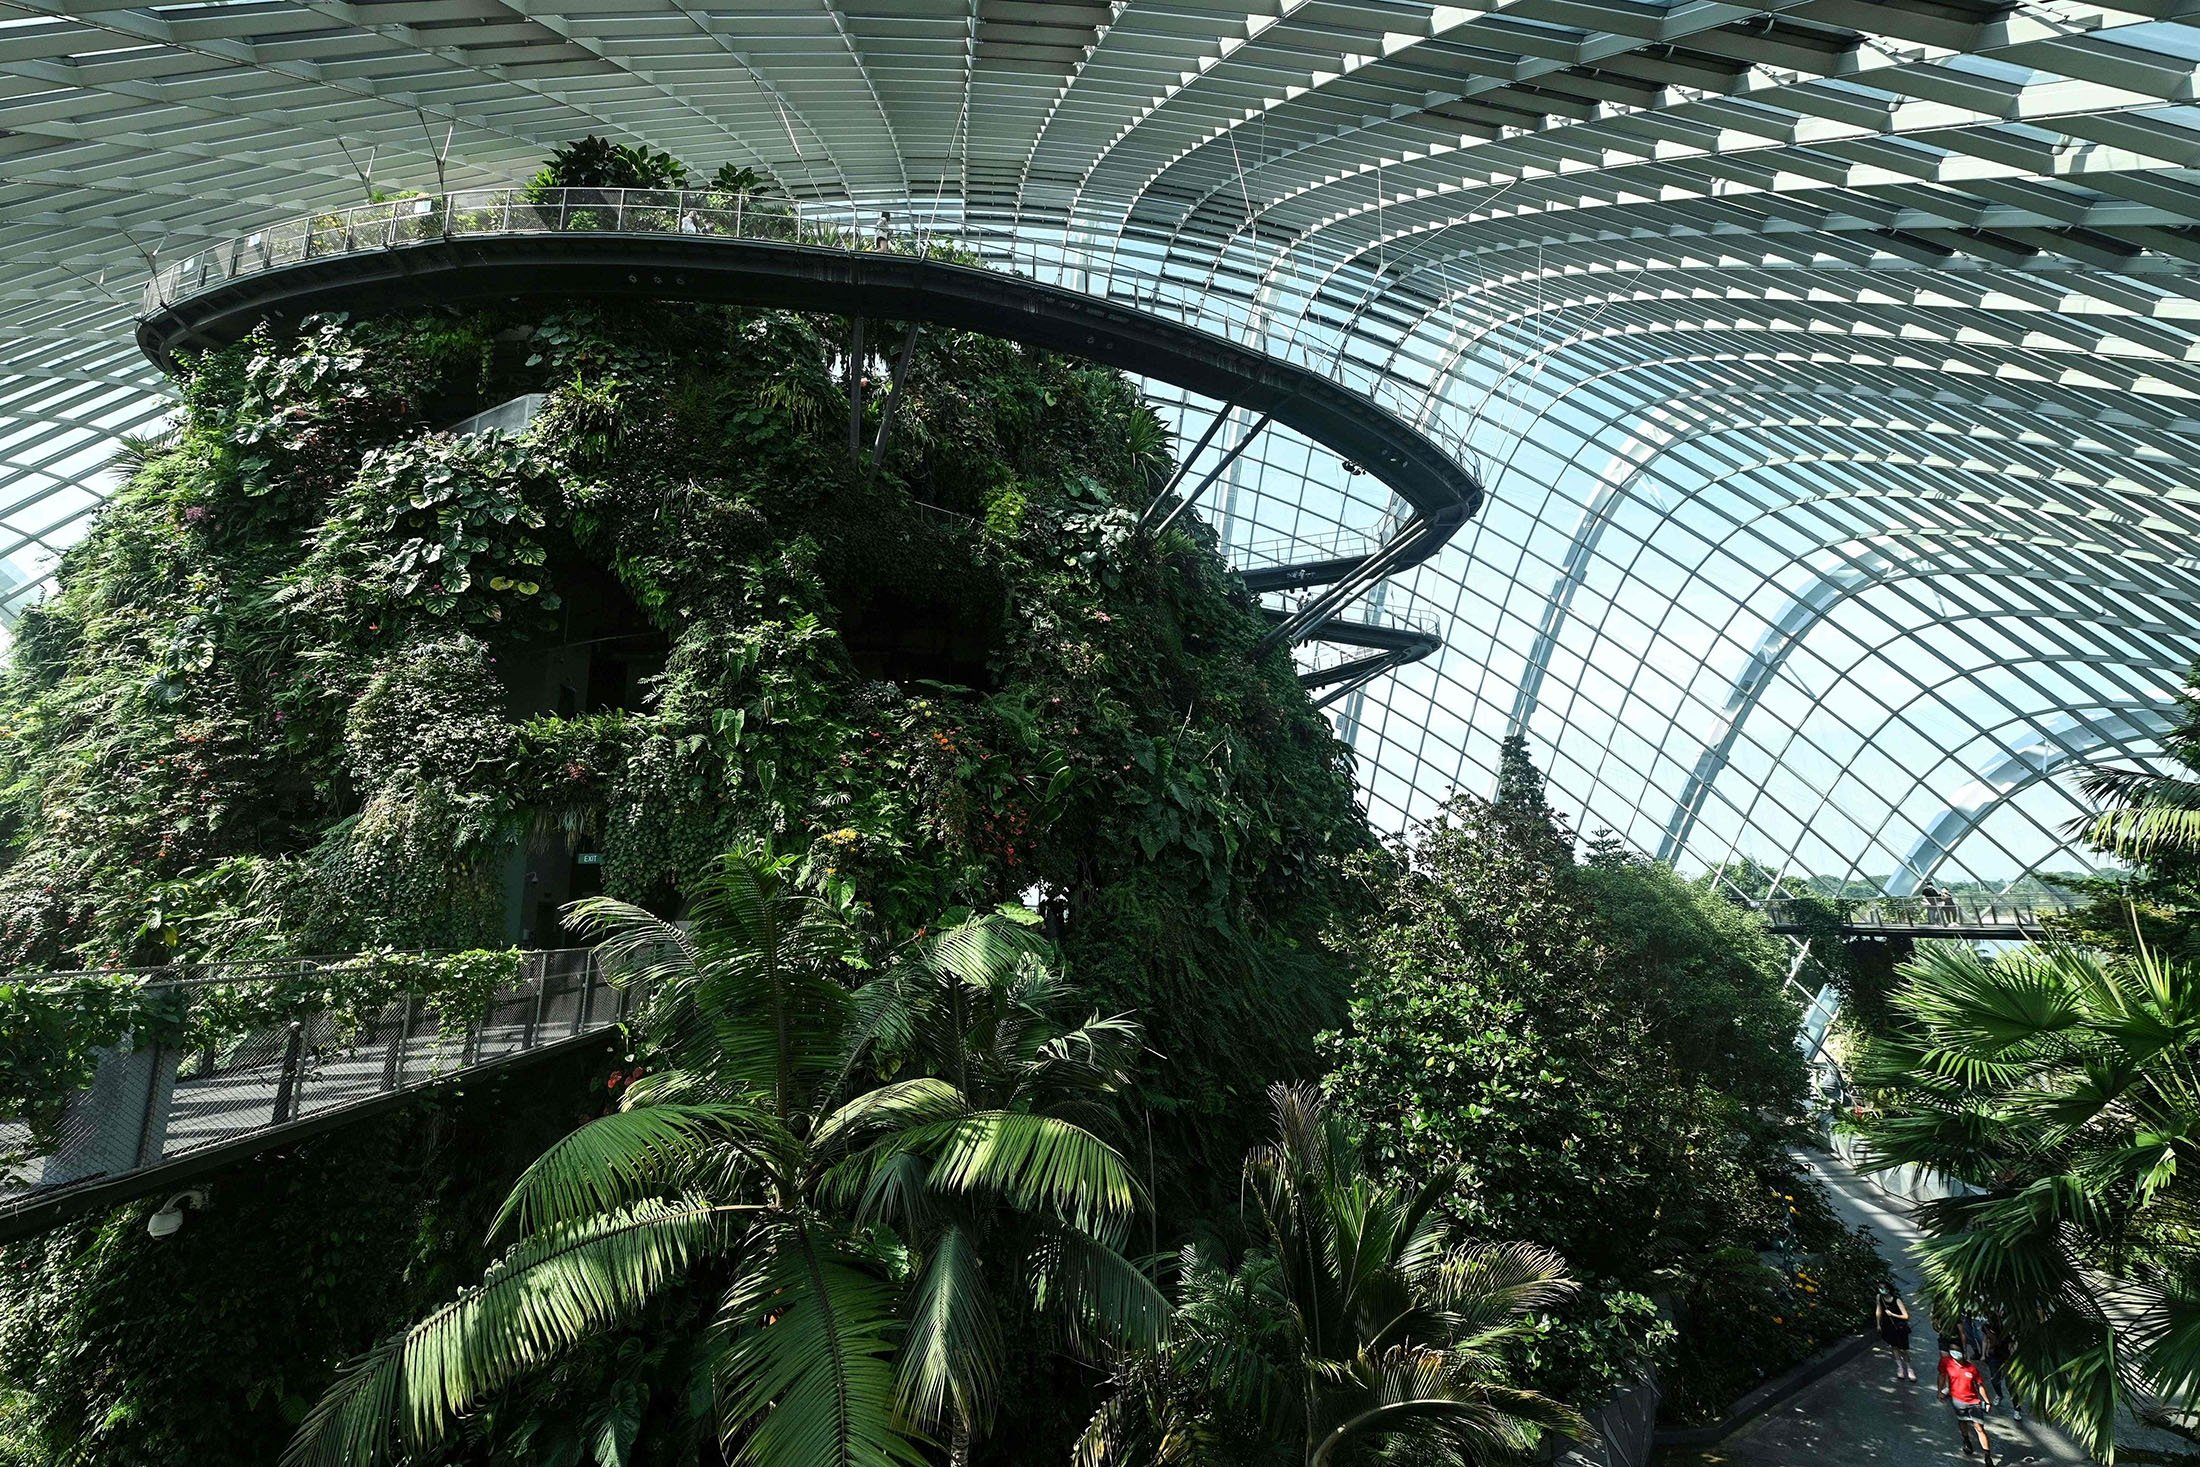 A view inside the Cloud Forest at Gardens by the Bay in Singapore, July 26, 2021. (AFP Photo)